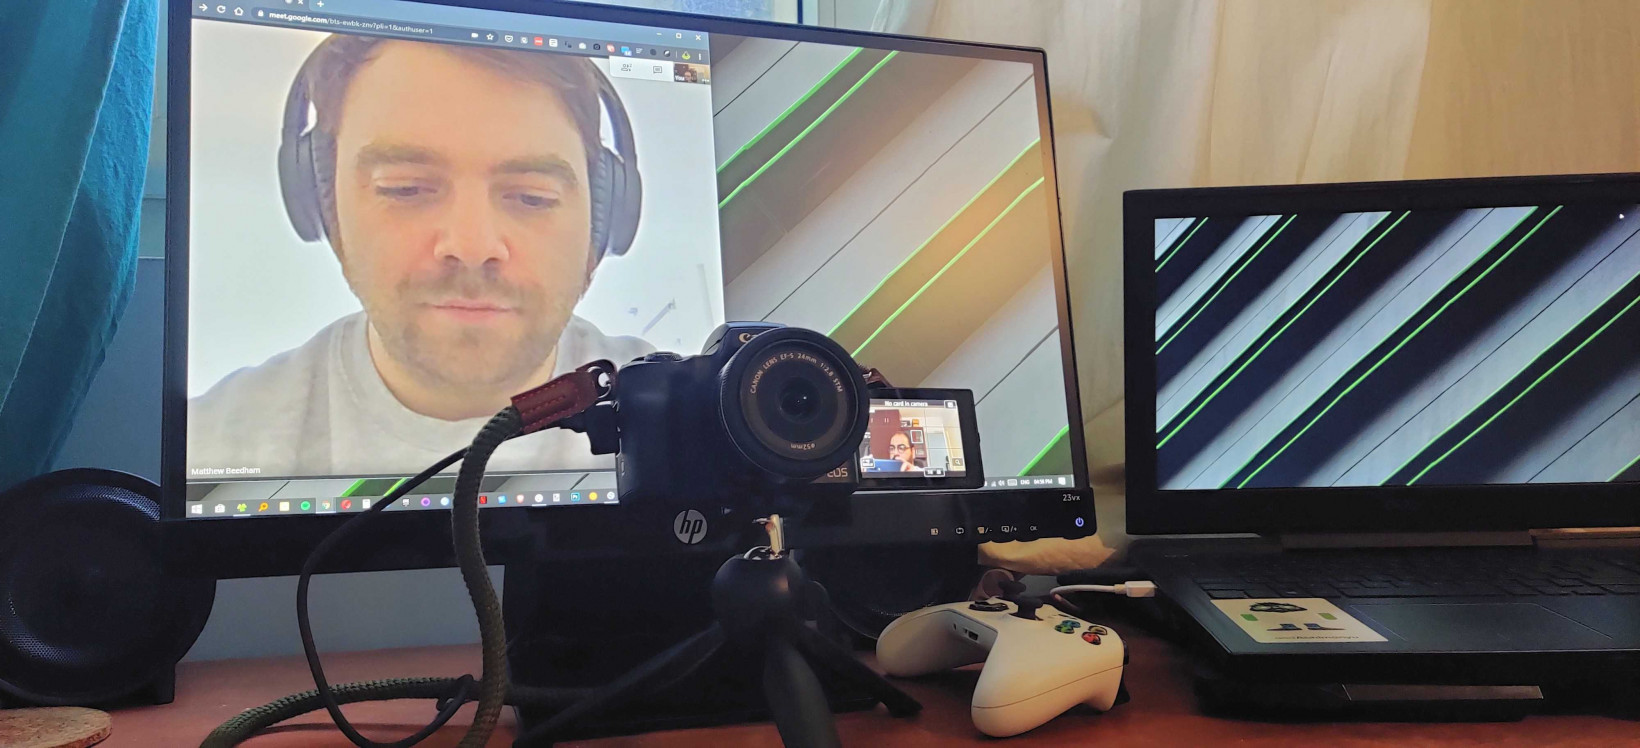 I've placed my camera in front of my monitor so I can look into the lens and also see other people on the call